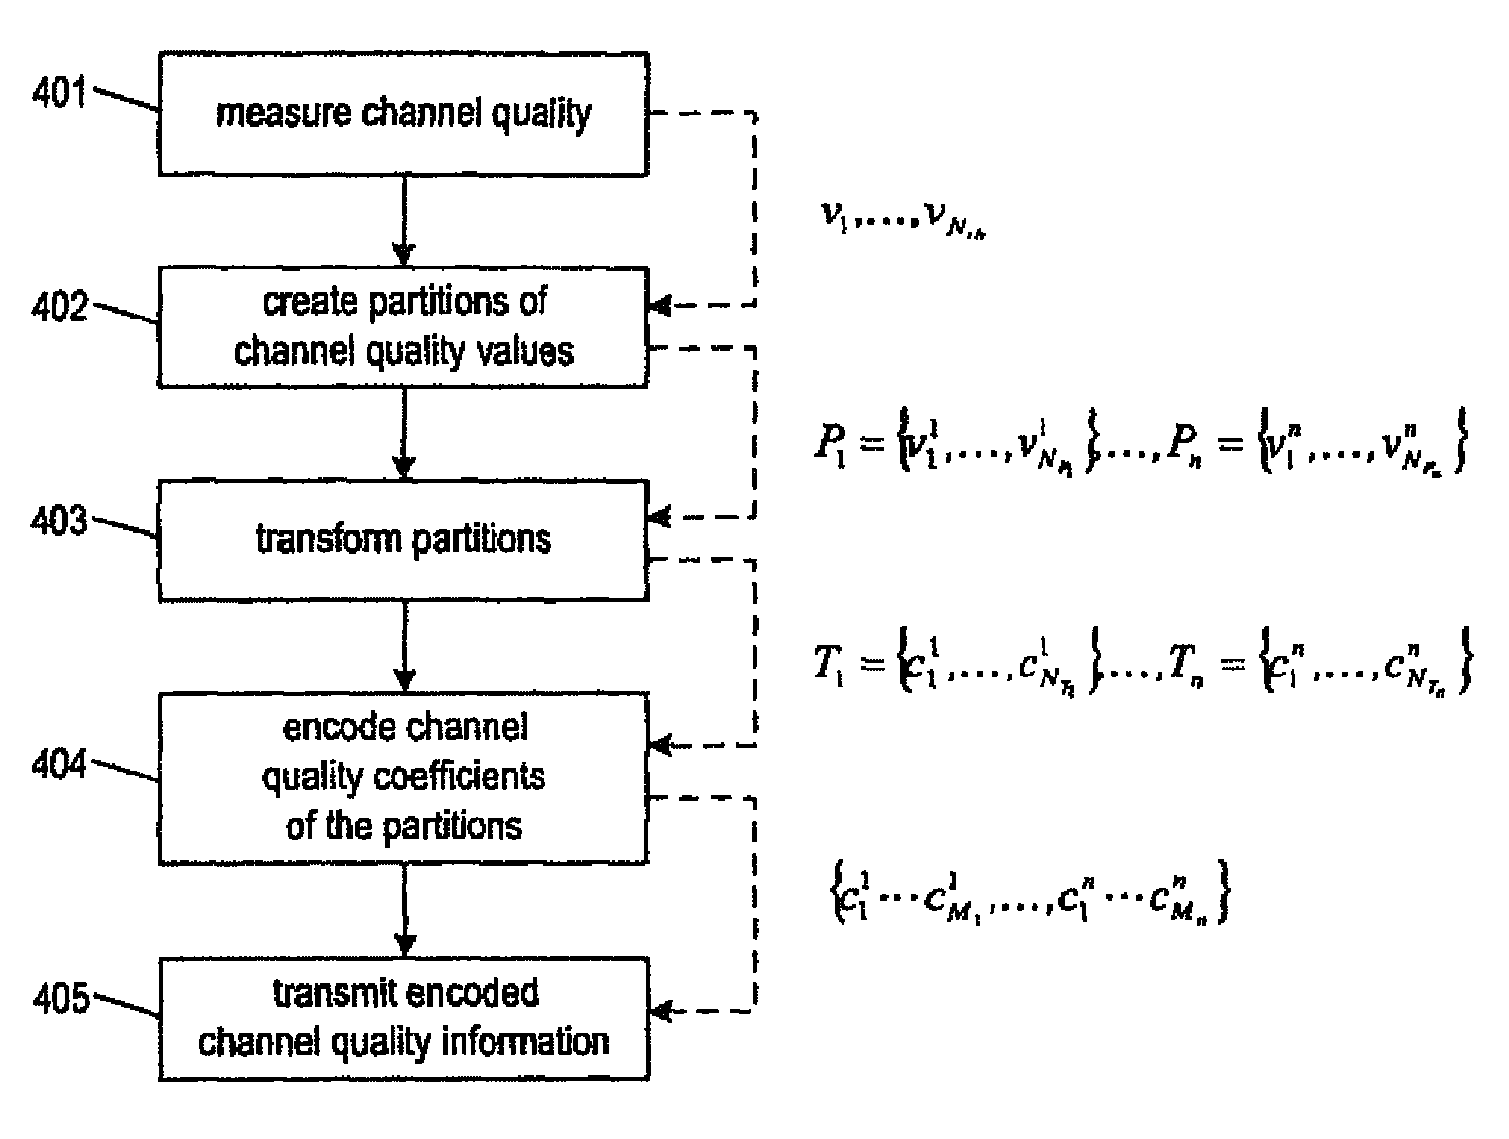 Communication scheme for channel quality information